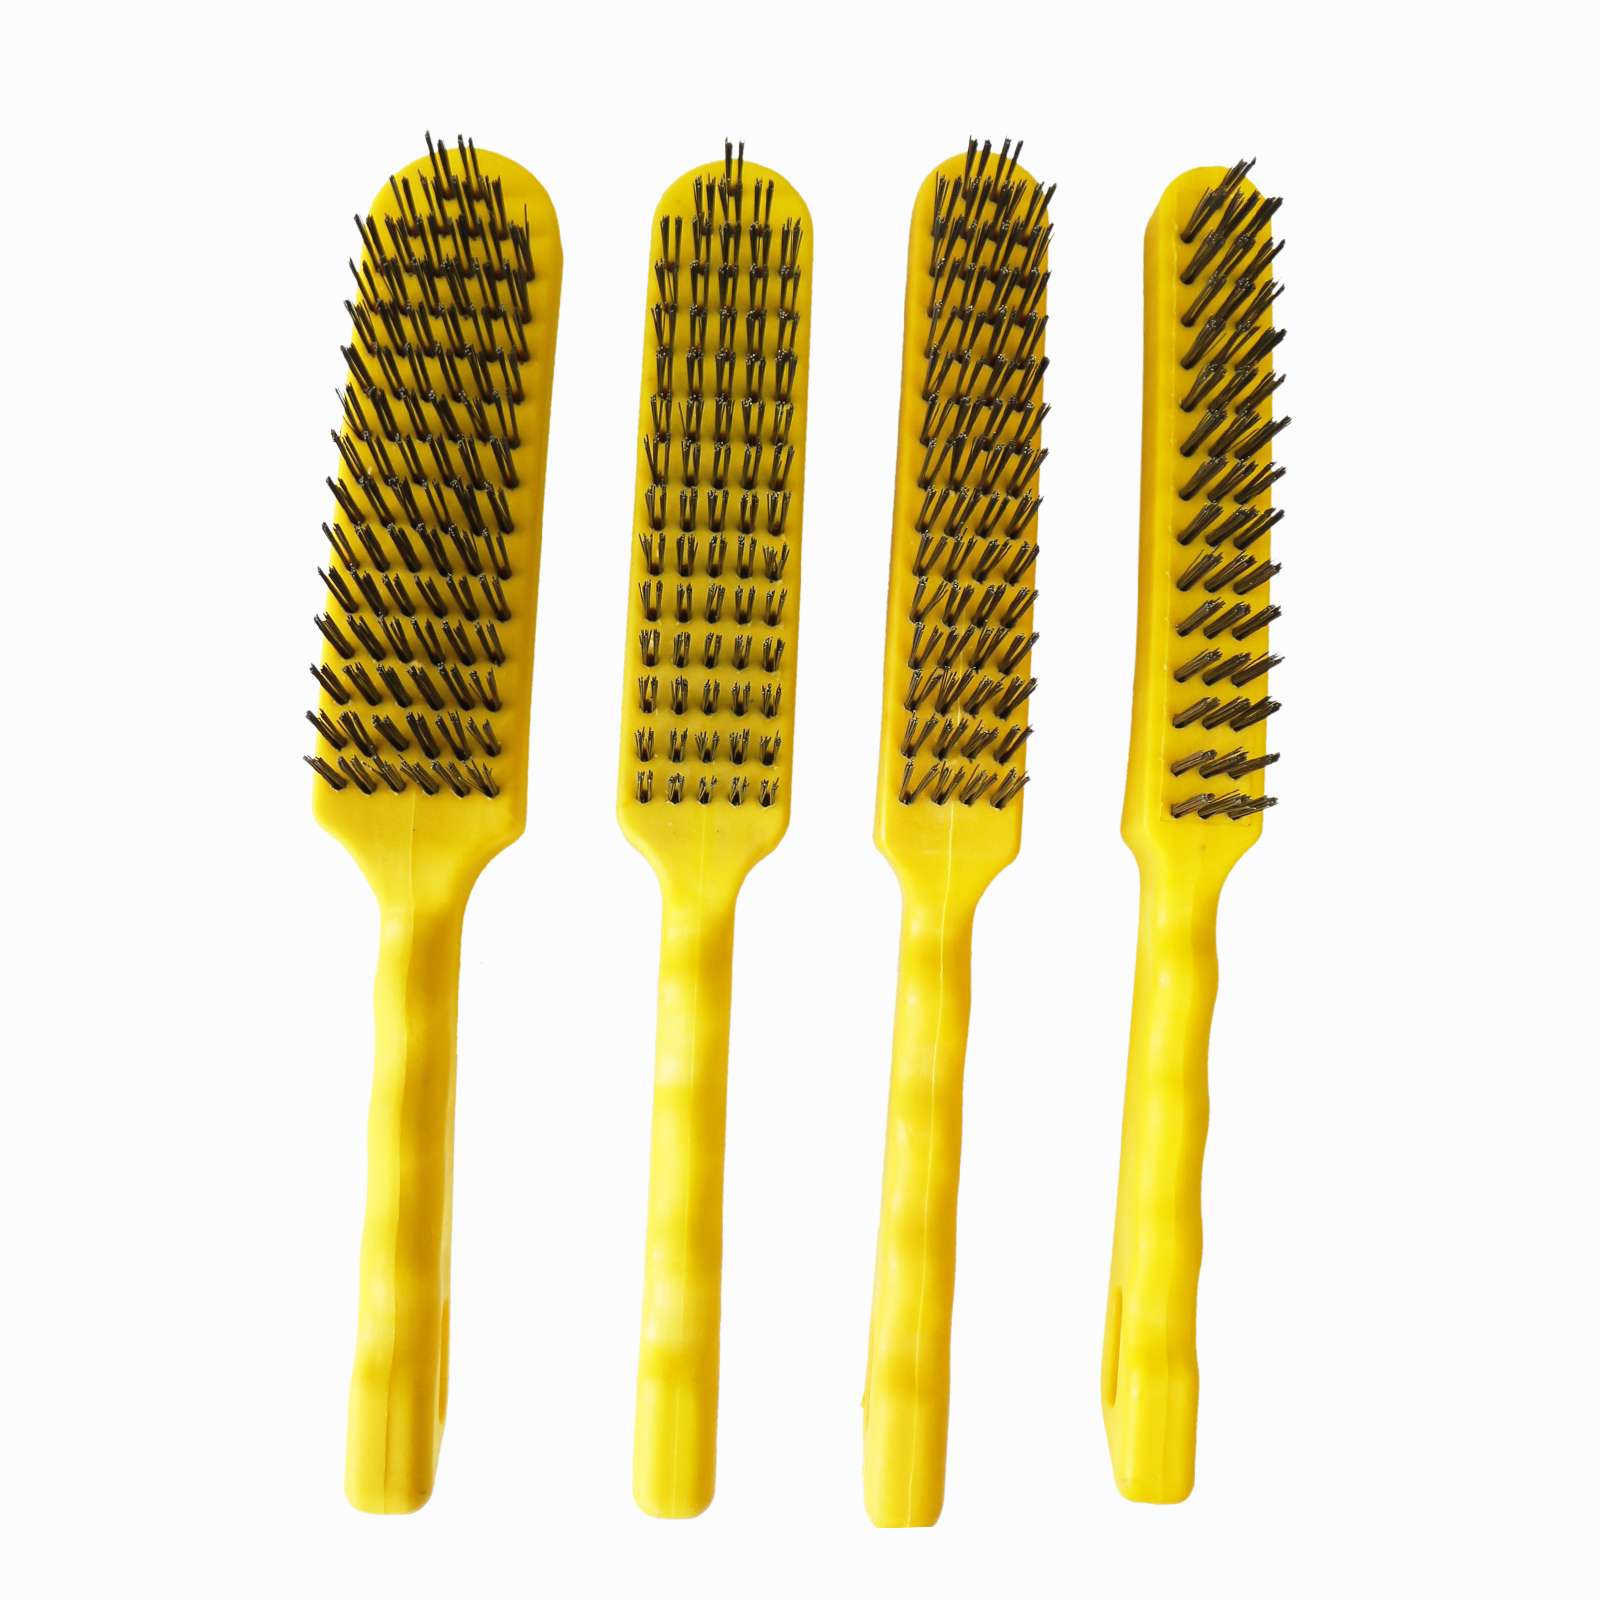 11"L Wire Brush Set with Plastic Handle, 4 Pieces - 1